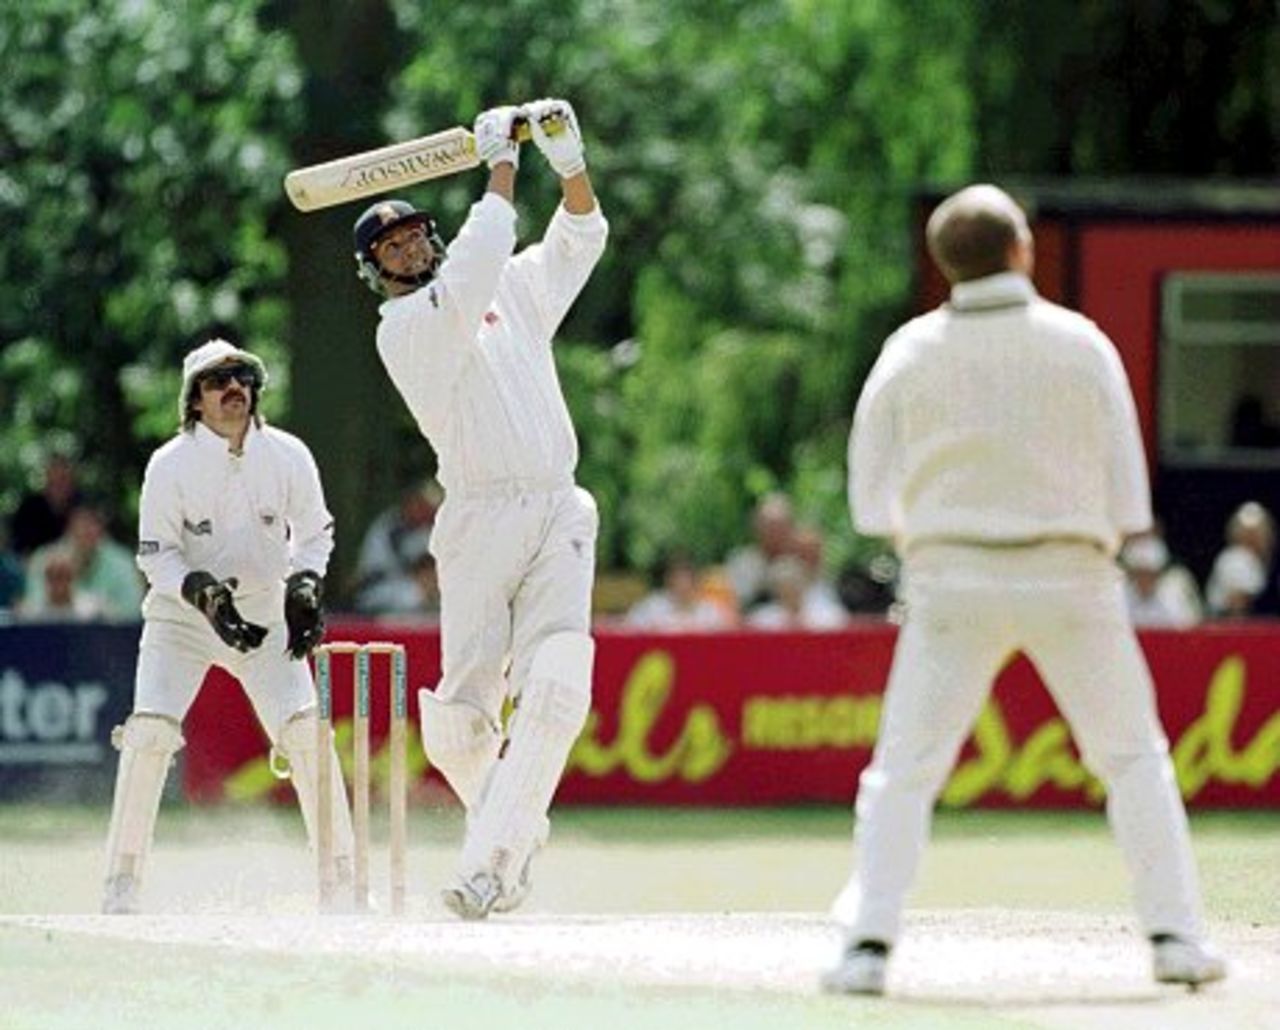 19 Aug 2000: Danny Law of Essex hits a six off the bowling of Jeremy Snape of Gloucestershire on the final day of the PPP Healthcare Division Two County Championship match at Castle Park at Colchester in Essex.